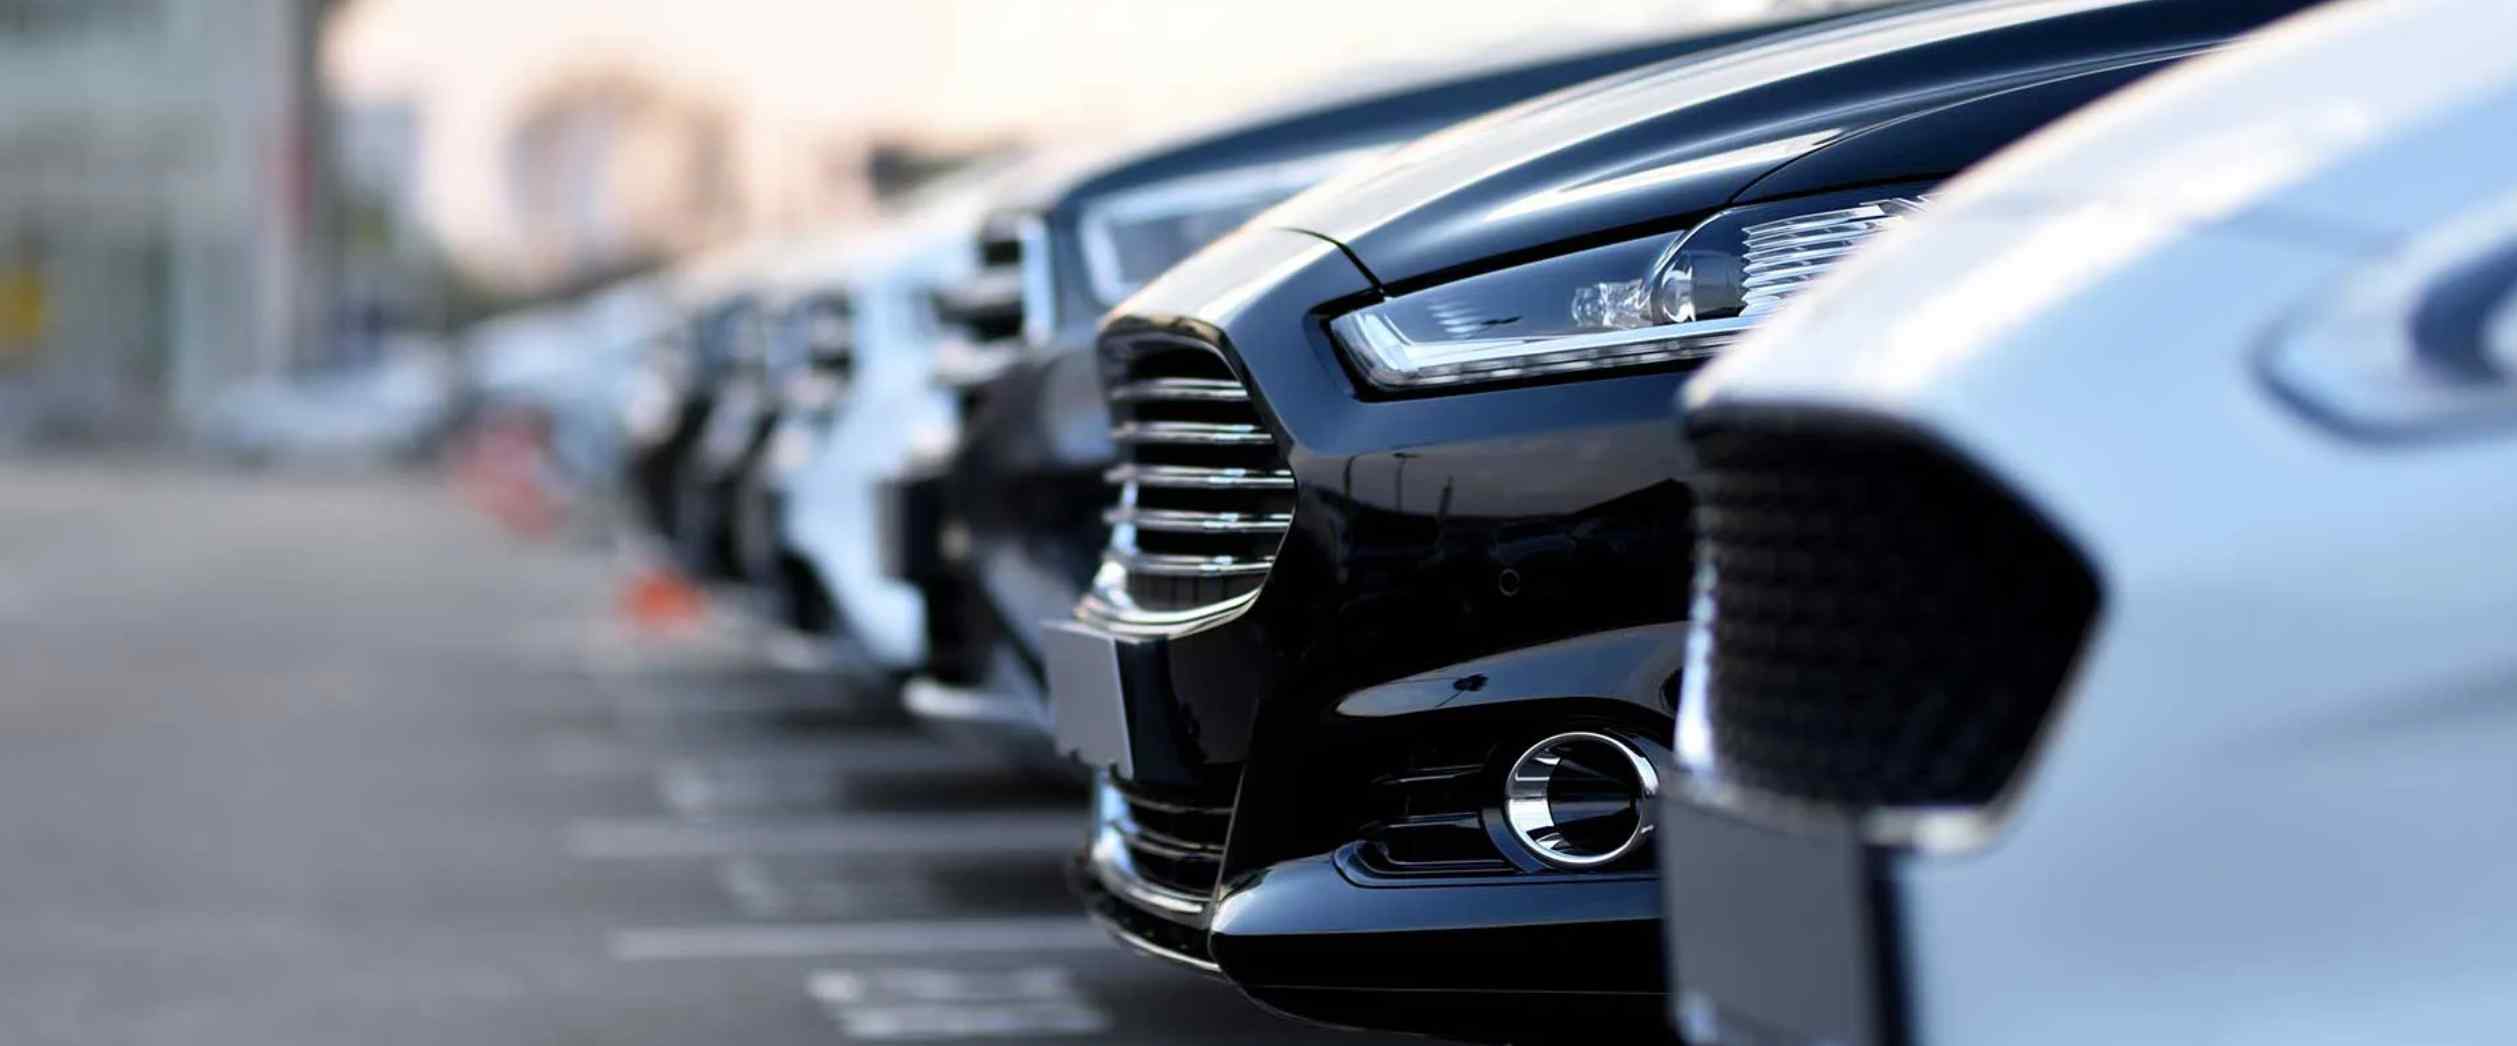 Here are some tips for choosing a car rental service.